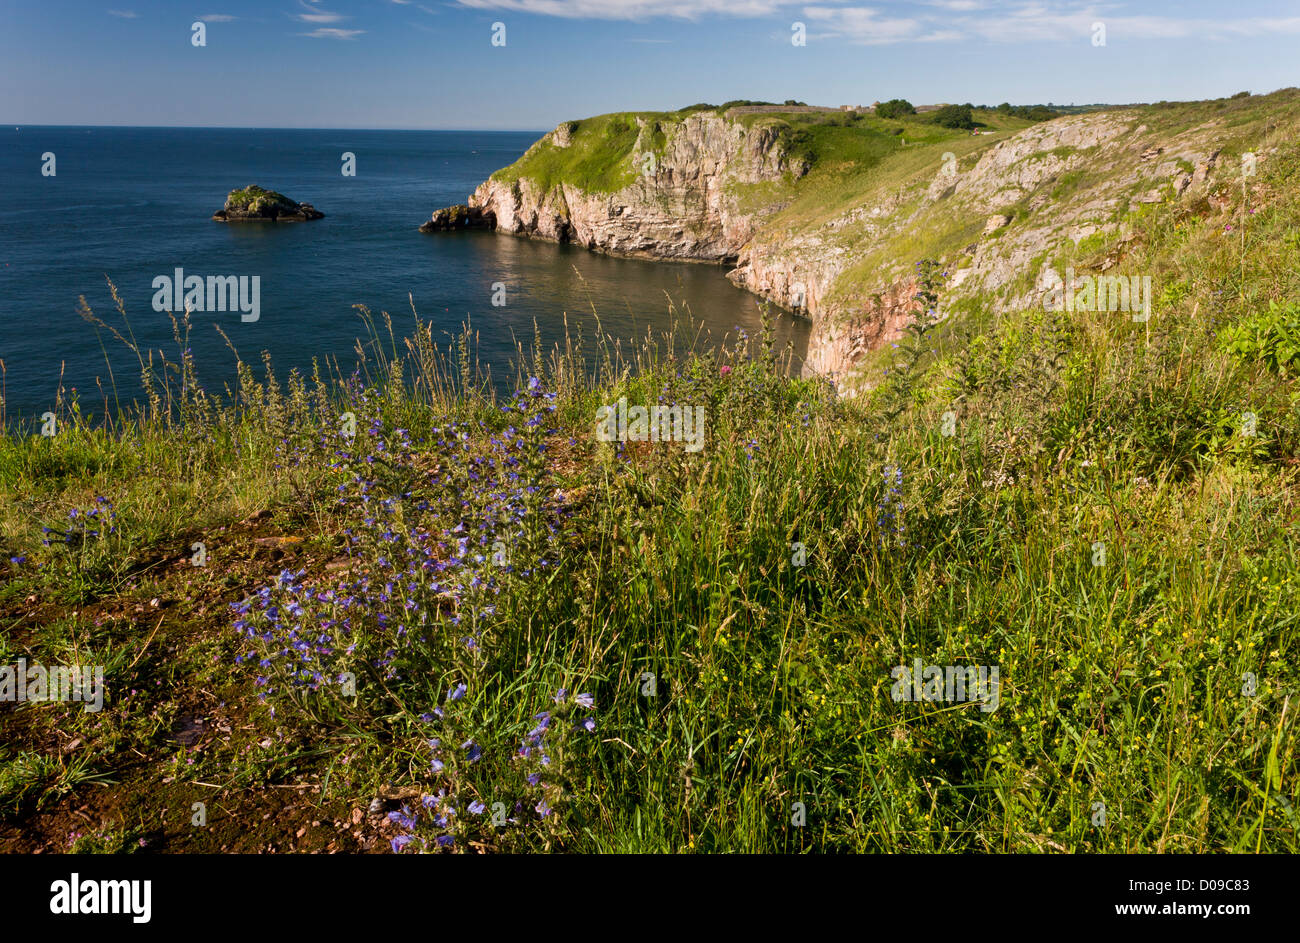 Cliffs at south-western end of Berry Head NNR Torbay, Devon, with Viper's bugloss and other flowers. Stock Photo